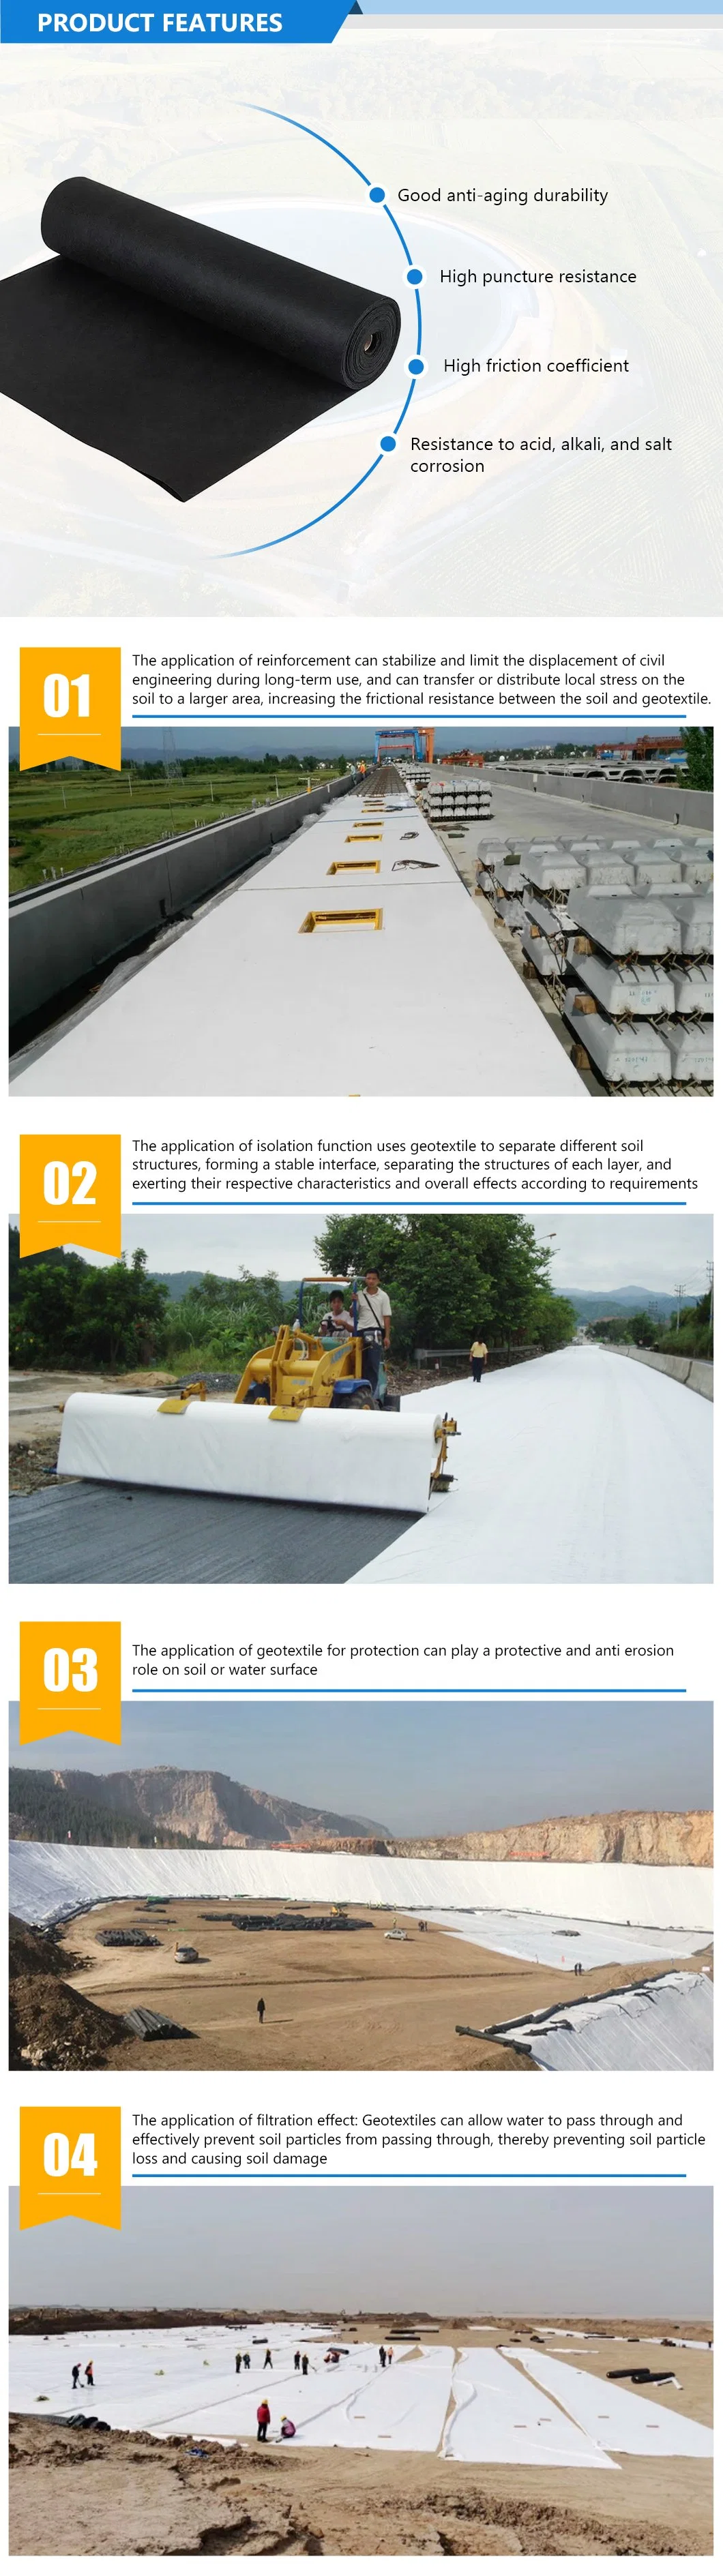 Free Sample Black White 300g PP Short Fiber Nonwoven Geotextile Geofabric Soil Stabilization Road Beds Covering Cloth